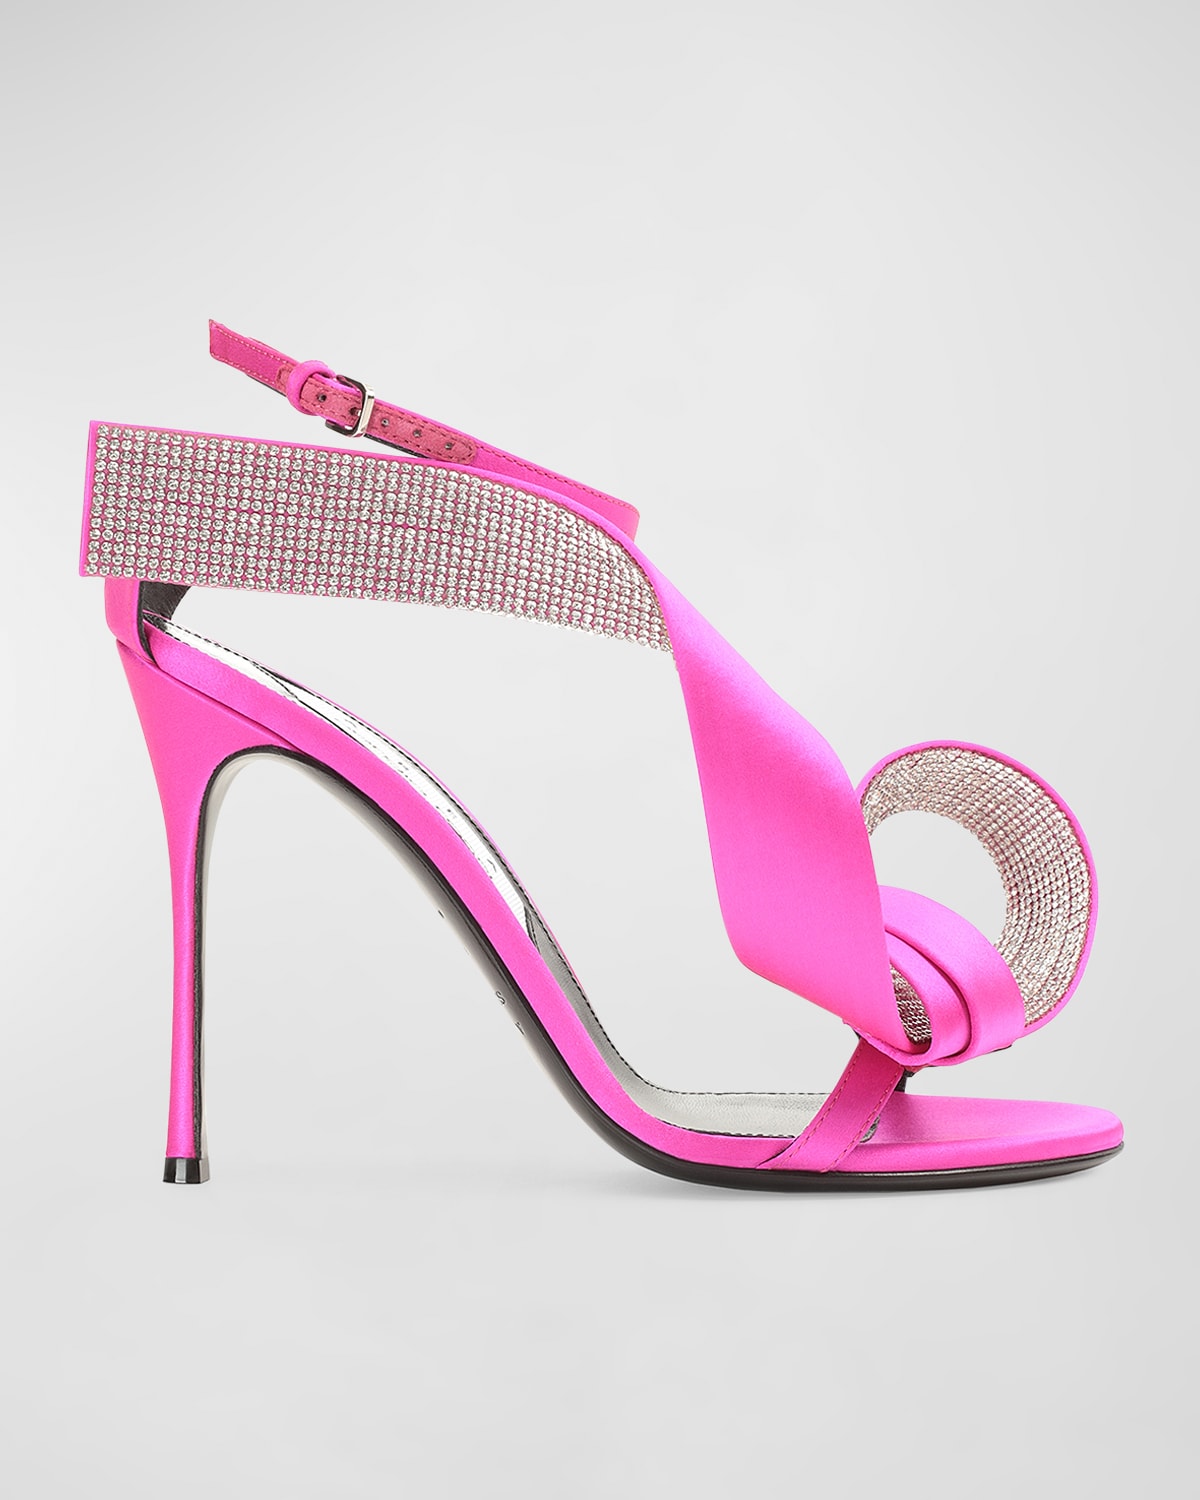 AREA X SERGIO ROSSI SCULPTURED CRYSTAL SATIN ANKLE-STRAP SANDALS